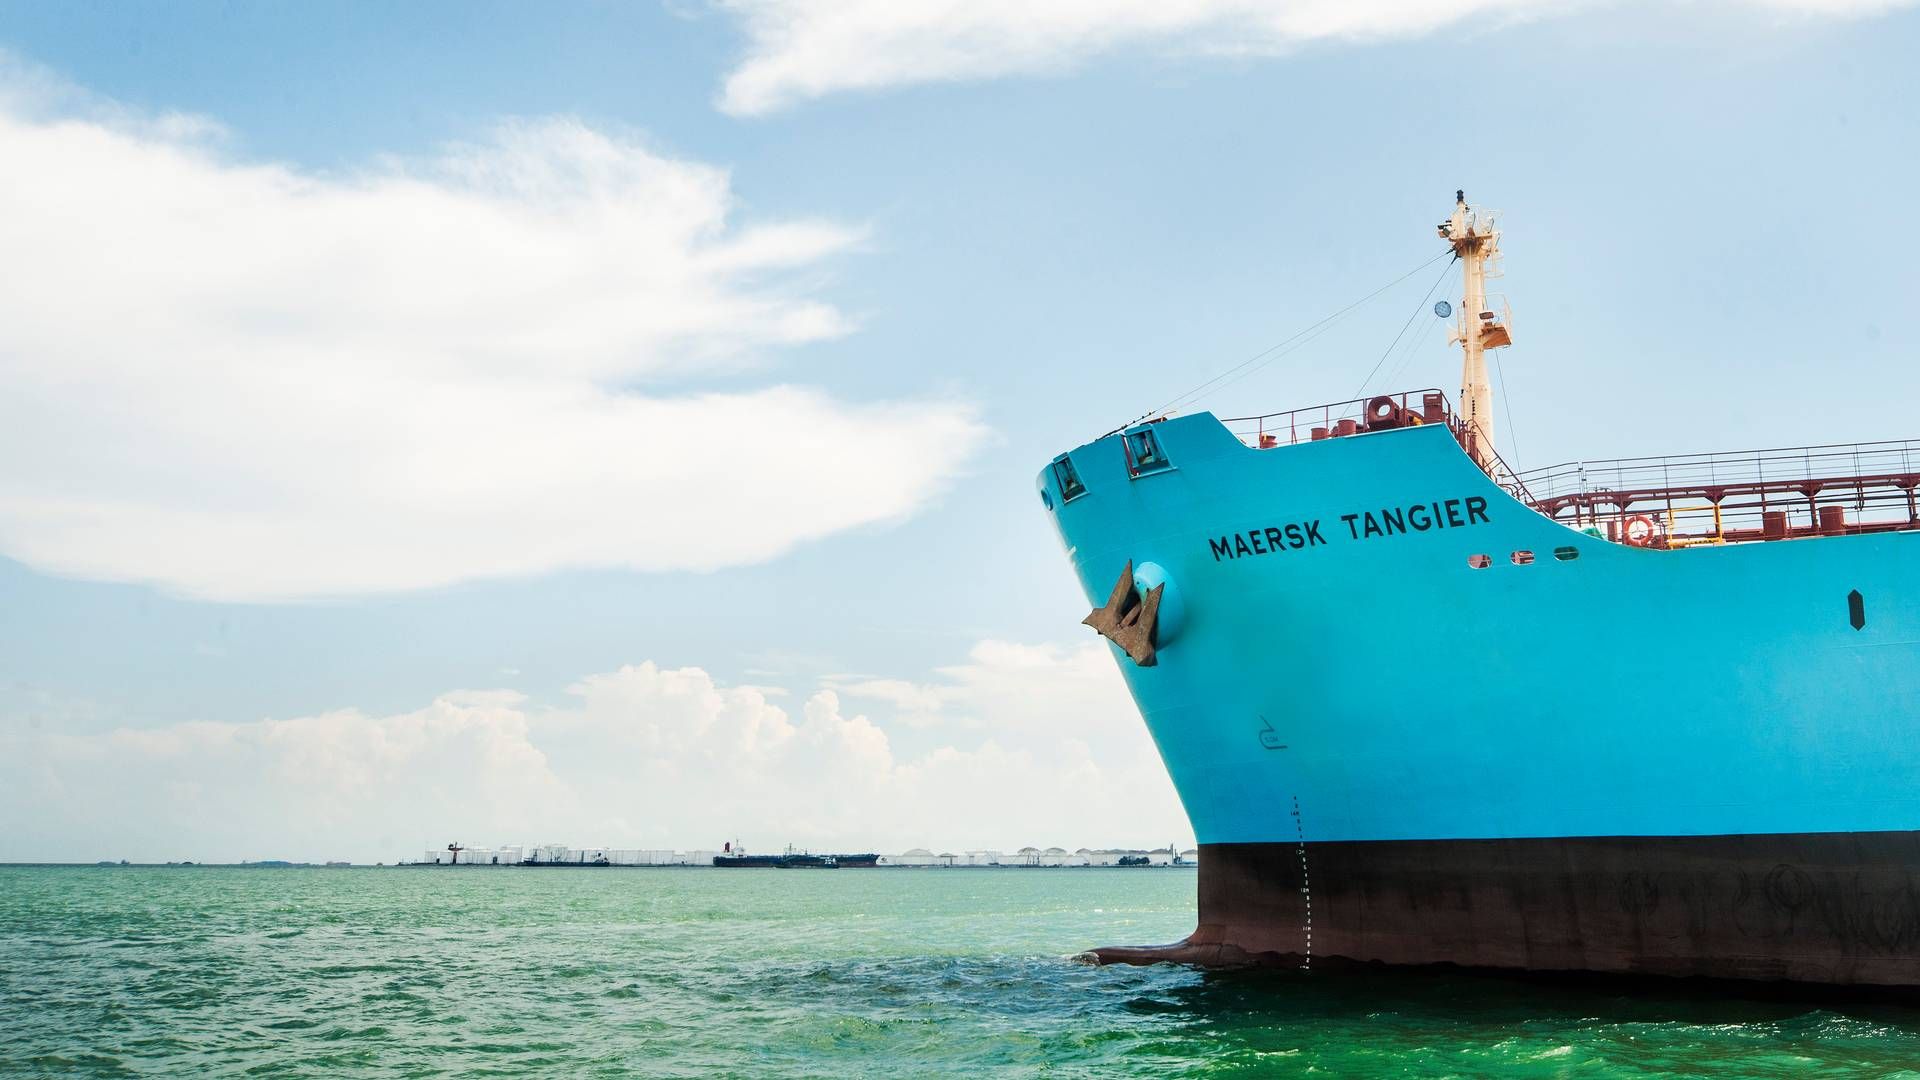 Archival photograph. | Photo: Pr / Maersk Tankers